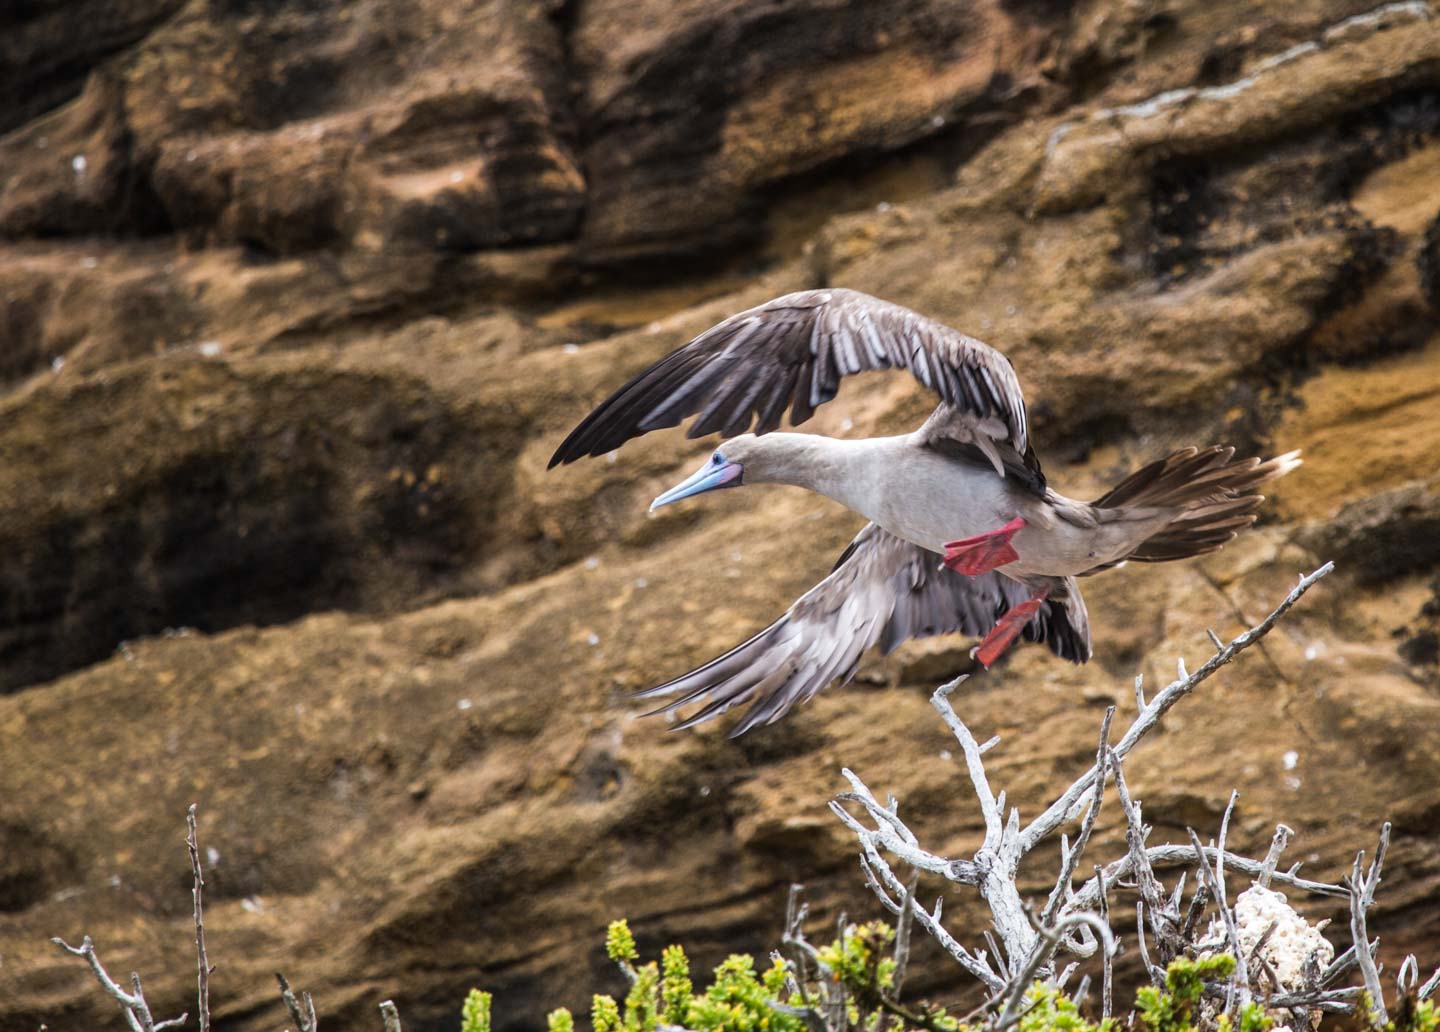 Red-footed booby flying from its nest at Punta Pitt, San Cristóbal, Galápagos Islands, Ecuador